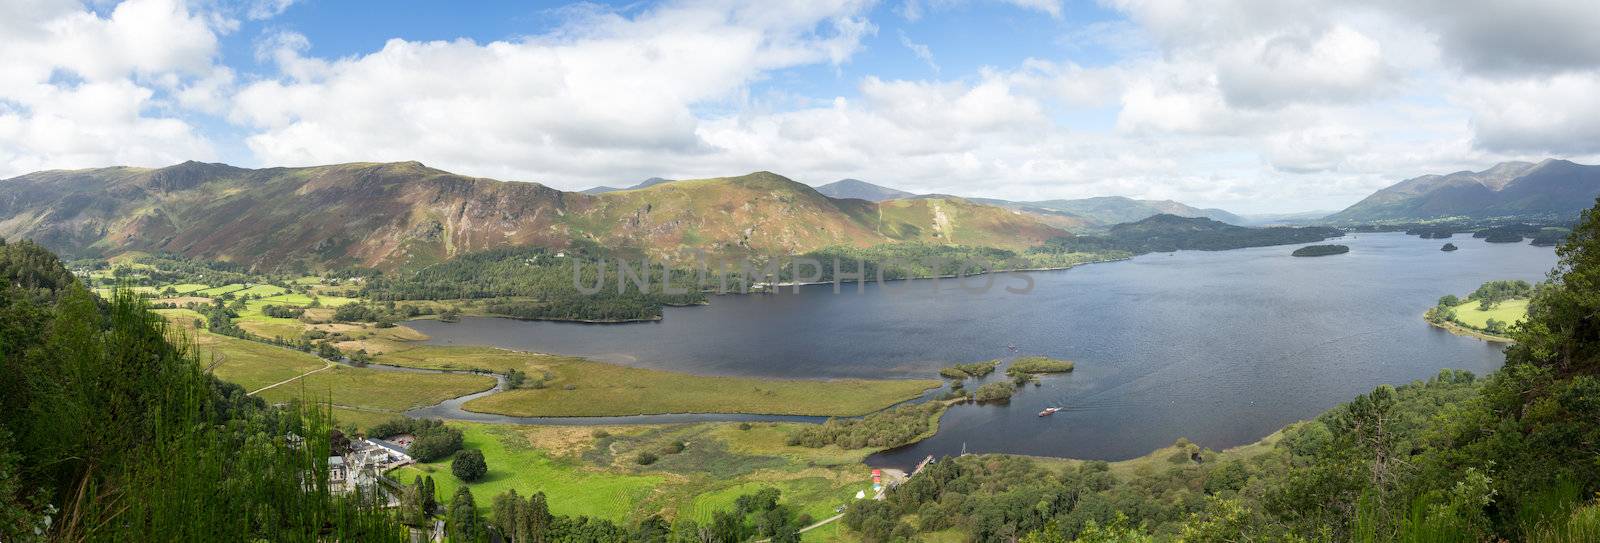 Derwent Water from viewpoint by steheap